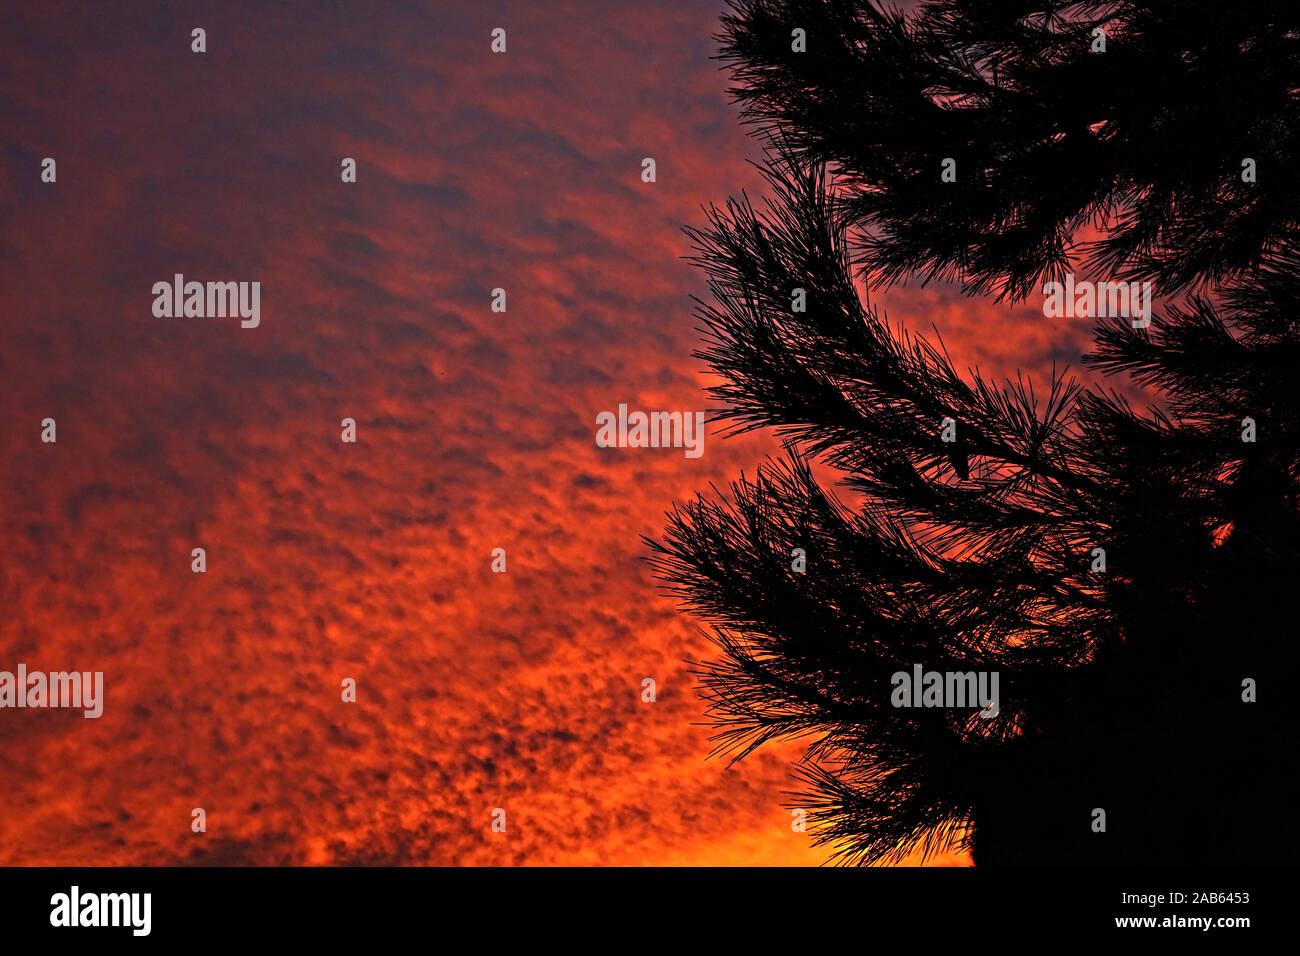 Silhouetted pine trees in front of a strong colourful sunset Stock Photo